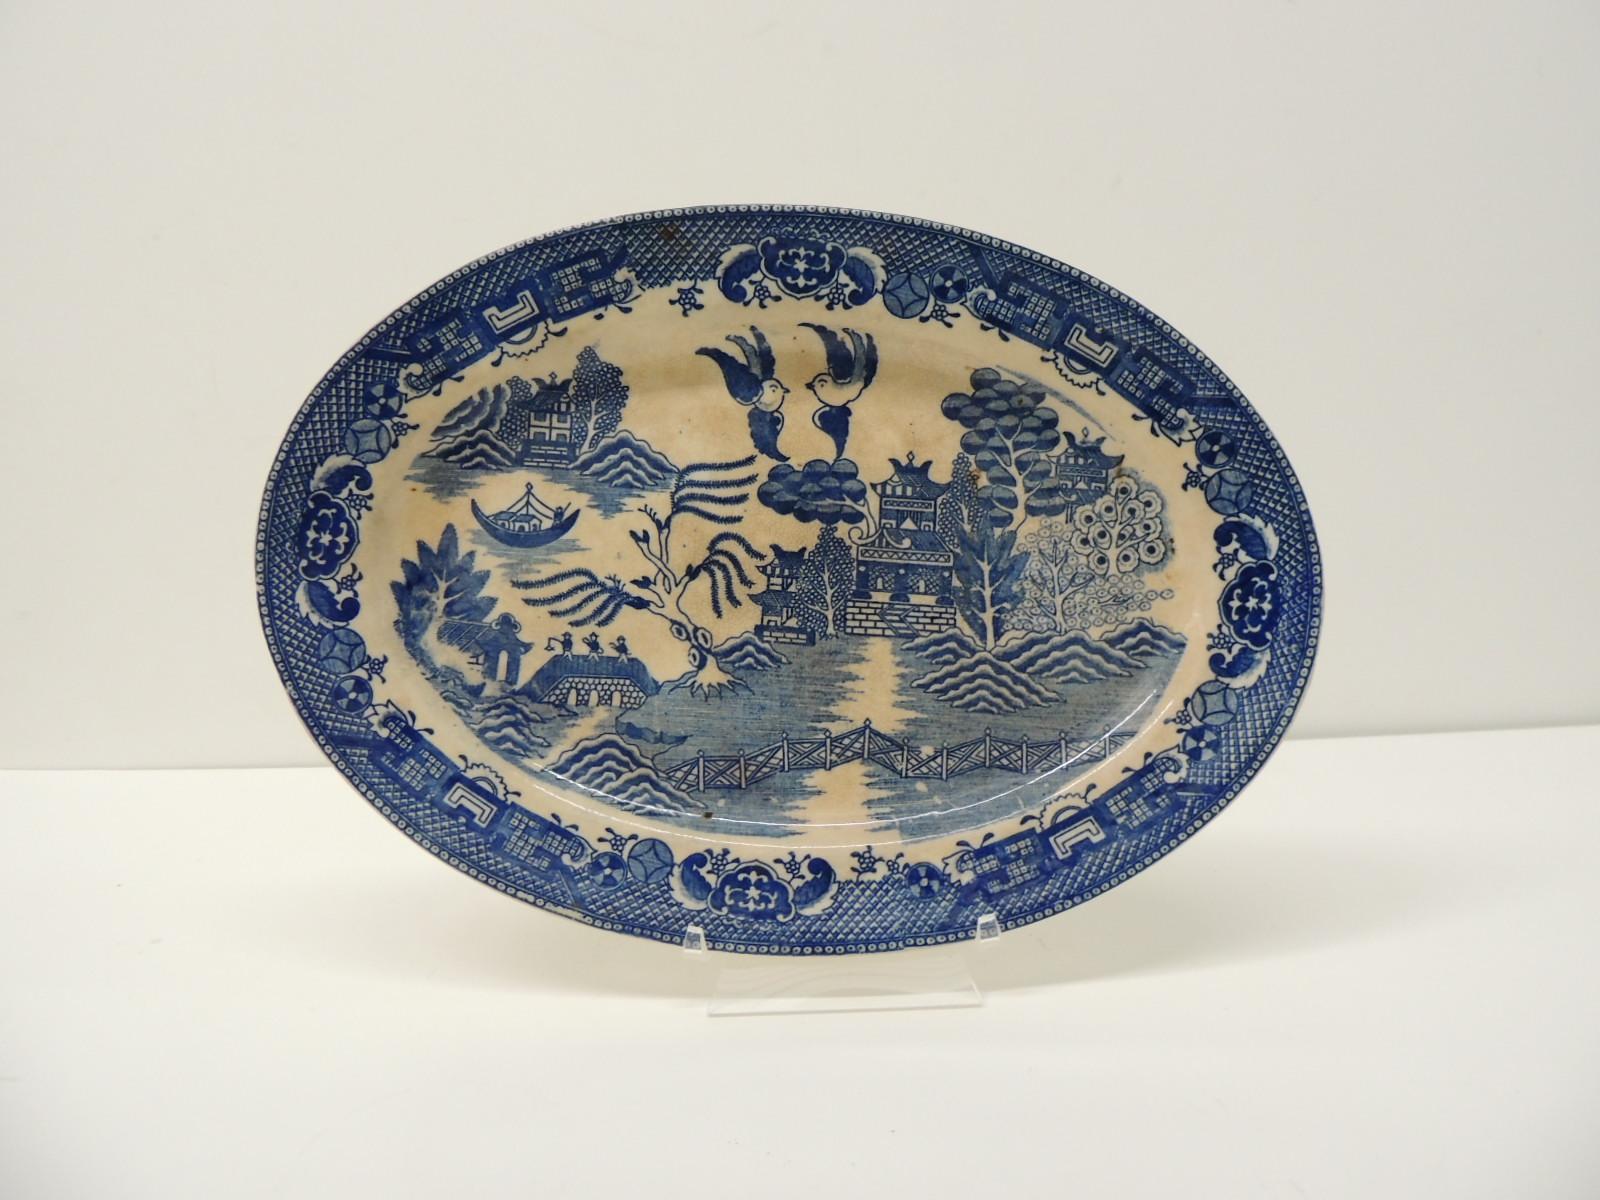 Vintage oval decorative small platter with blue and white Willow pattern
Stamped: House of Blue Willow, Japan
Size: 12.5